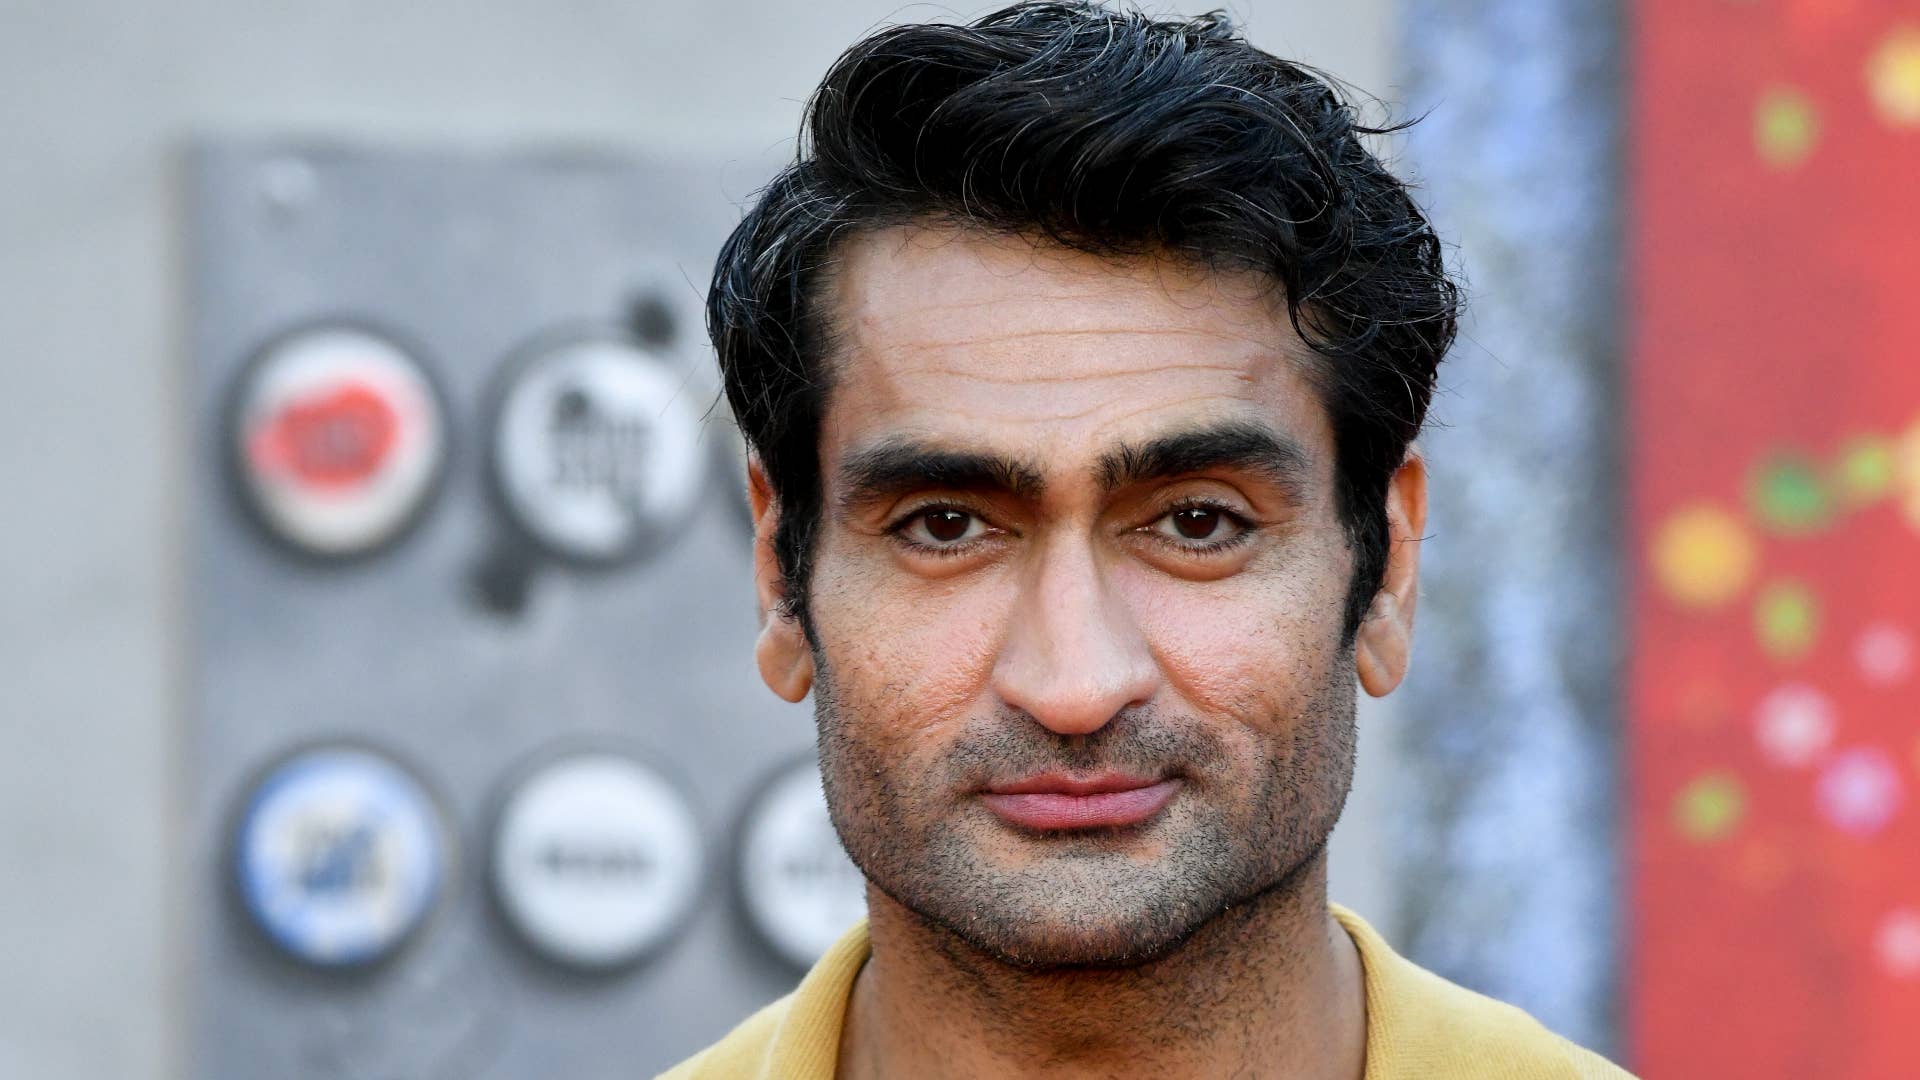 Kumail Nanjiani poses for photo on red carpet during 'The Suicide Squad' premiere.